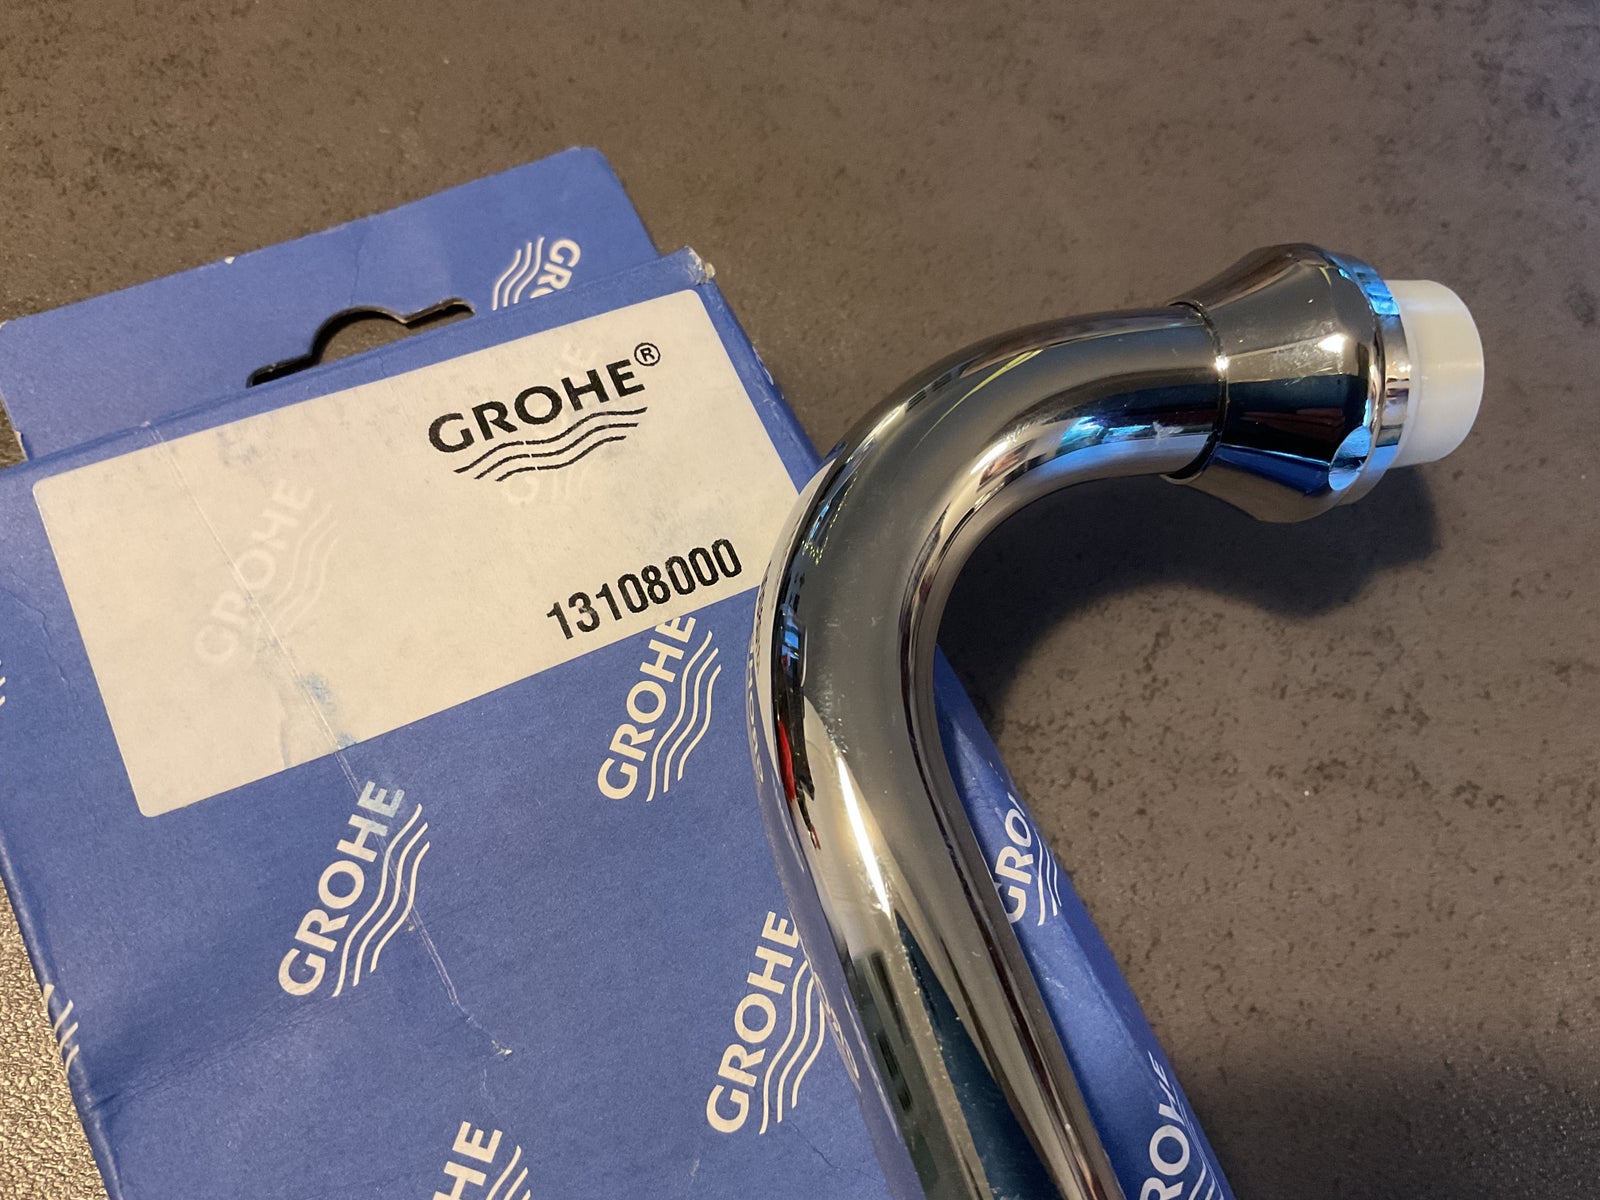 Andre armaturer, Grohe 3/4